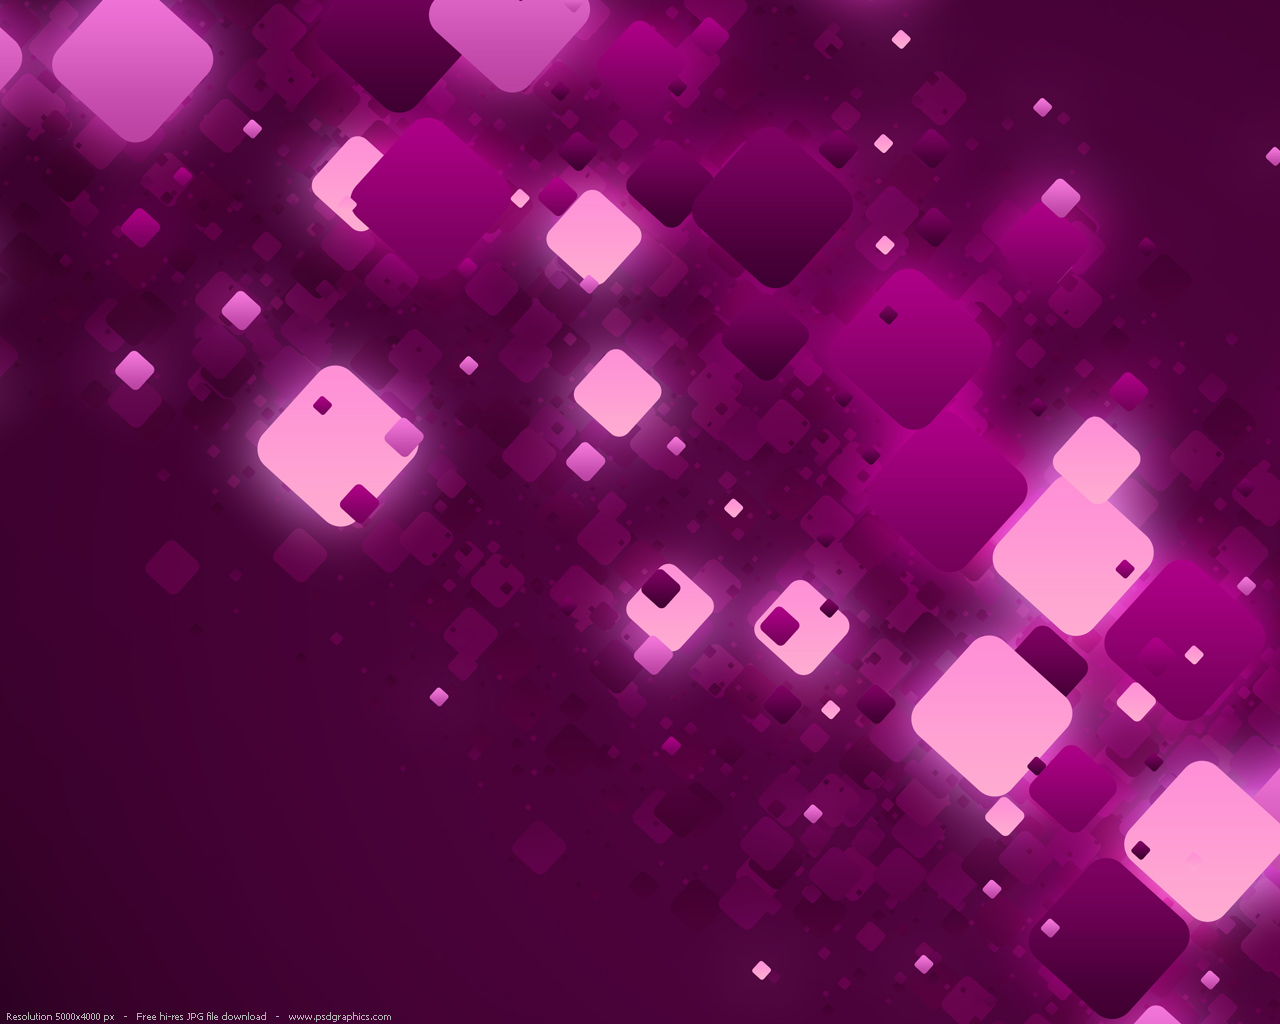 Image Cool Purple Abstract Desktop Wallpaper Pc Android